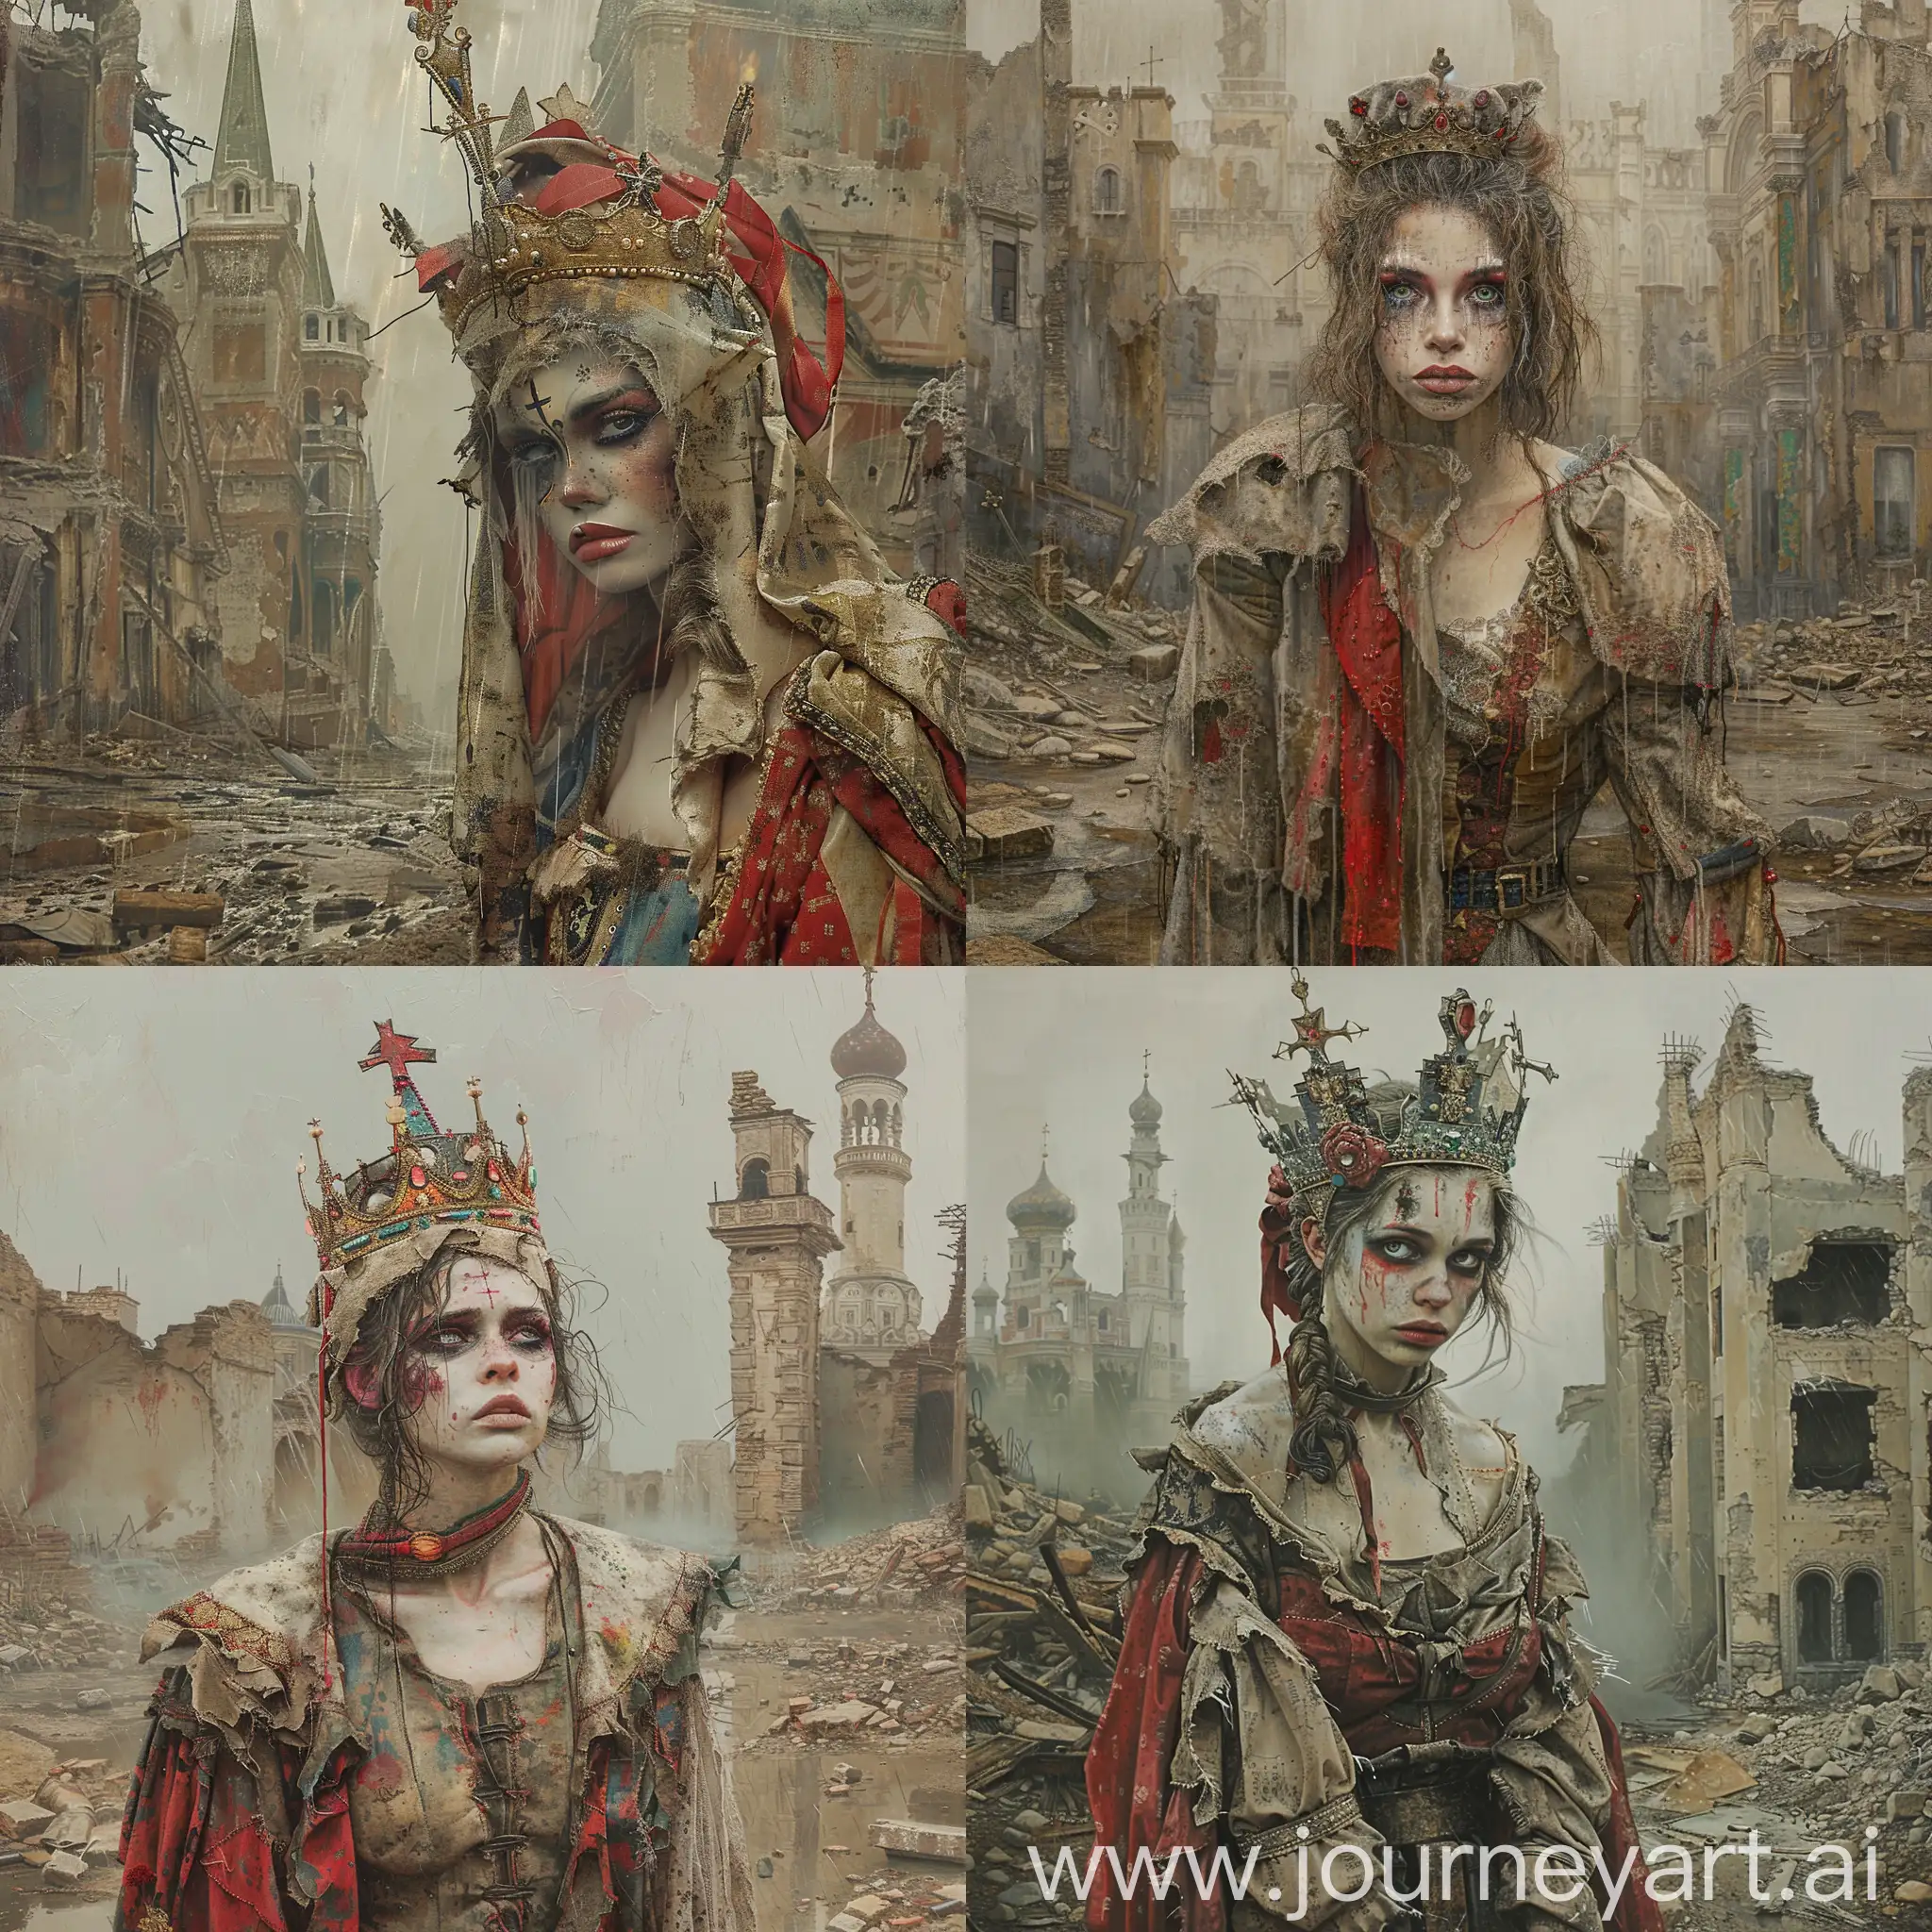 Medieval-Woman-in-Ruined-City-VictorianEra-Costume-Amid-Grandiose-Red-and-Beige-Ruins